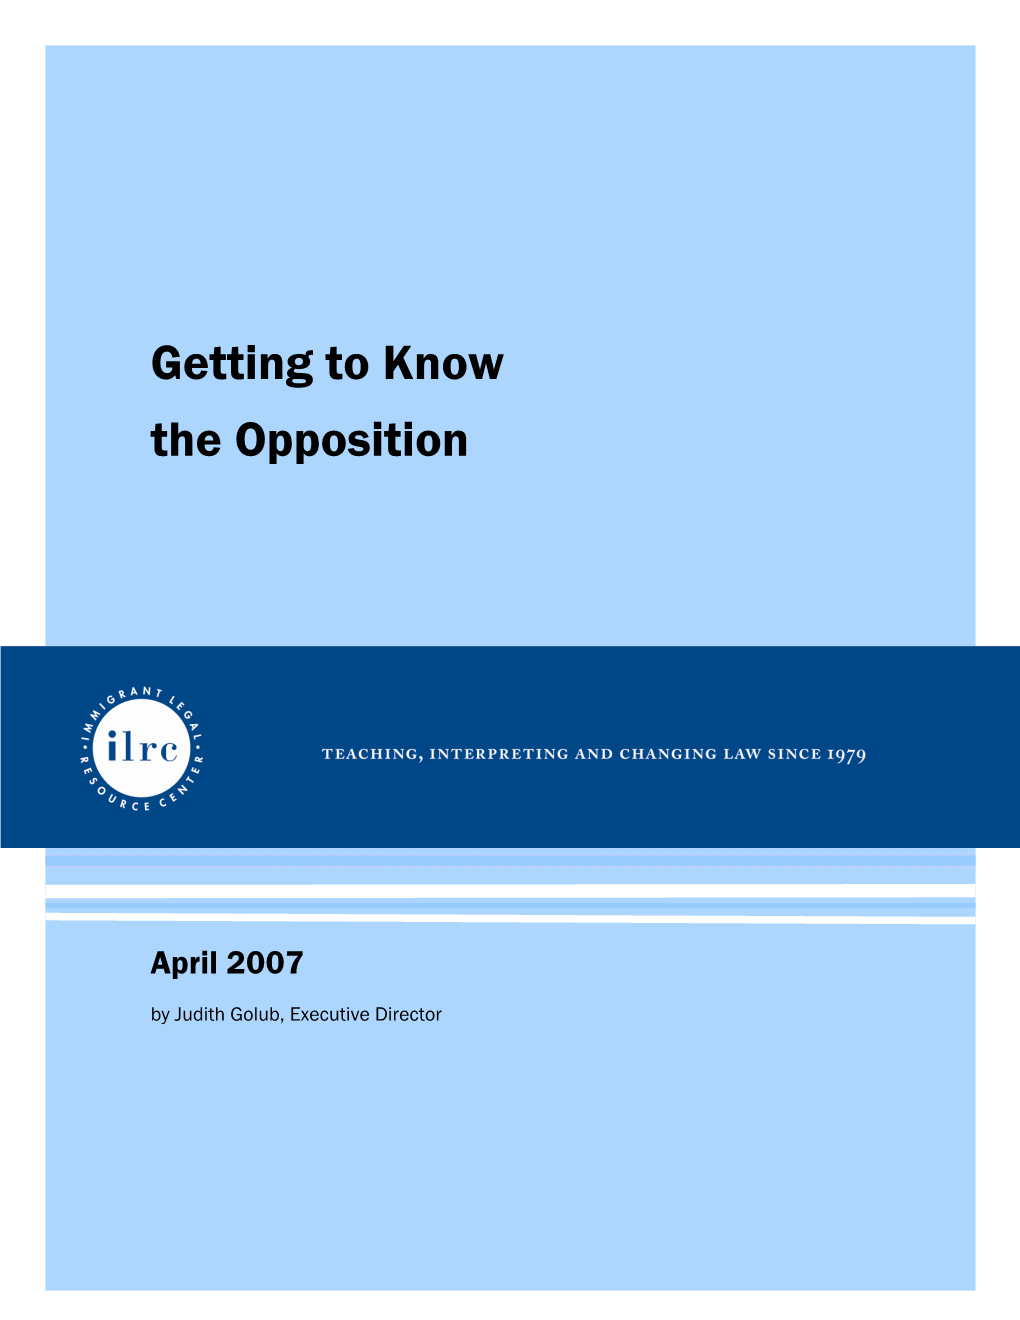 Getting to Know the Opposition